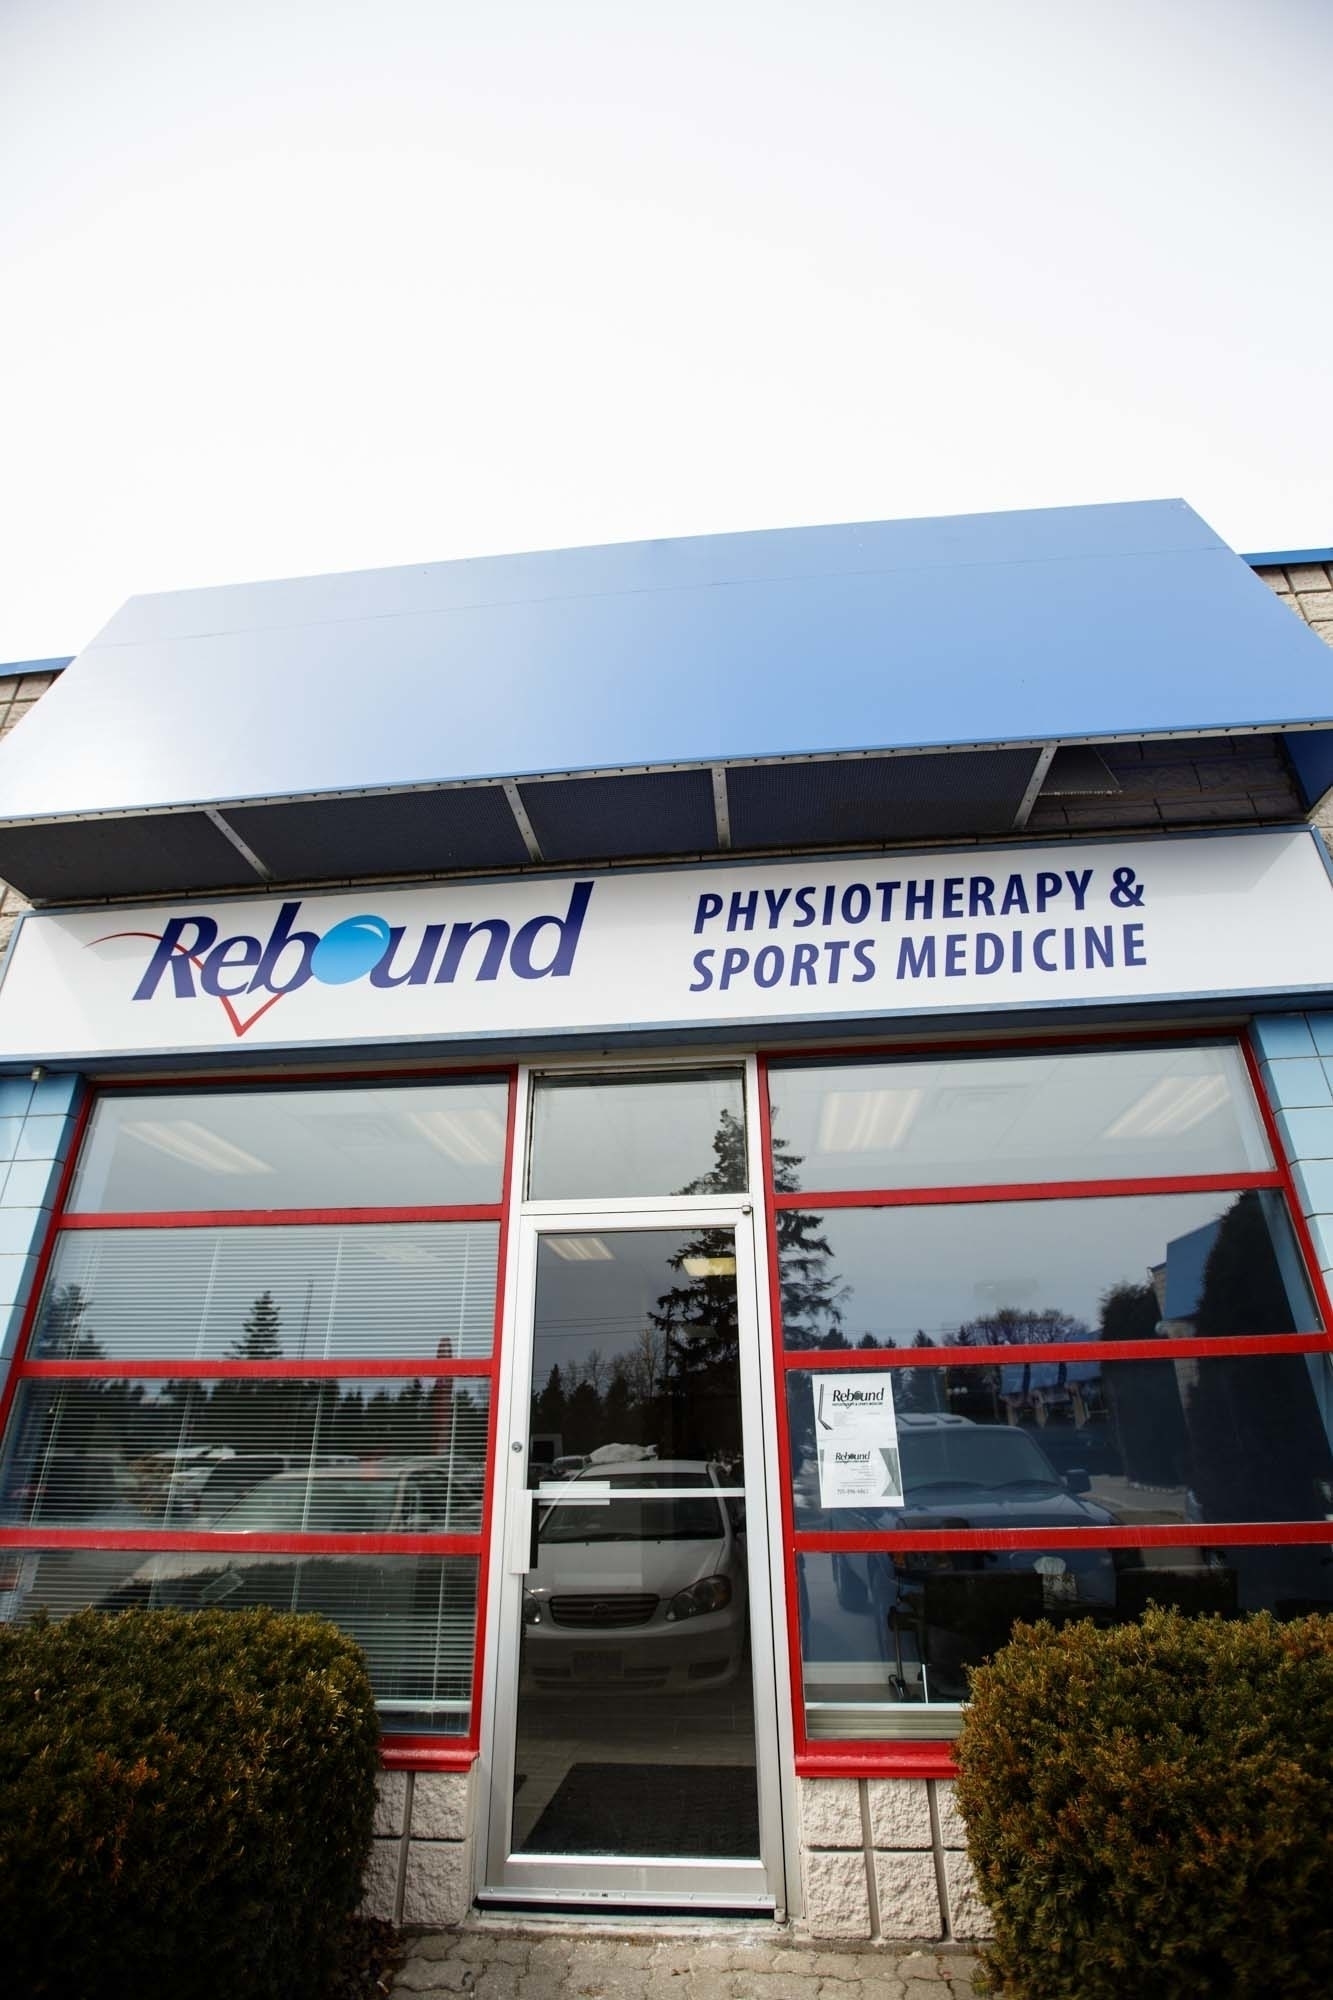 Rebound Physiotherapy & Sports Medicine - Médecins et chirurgiens